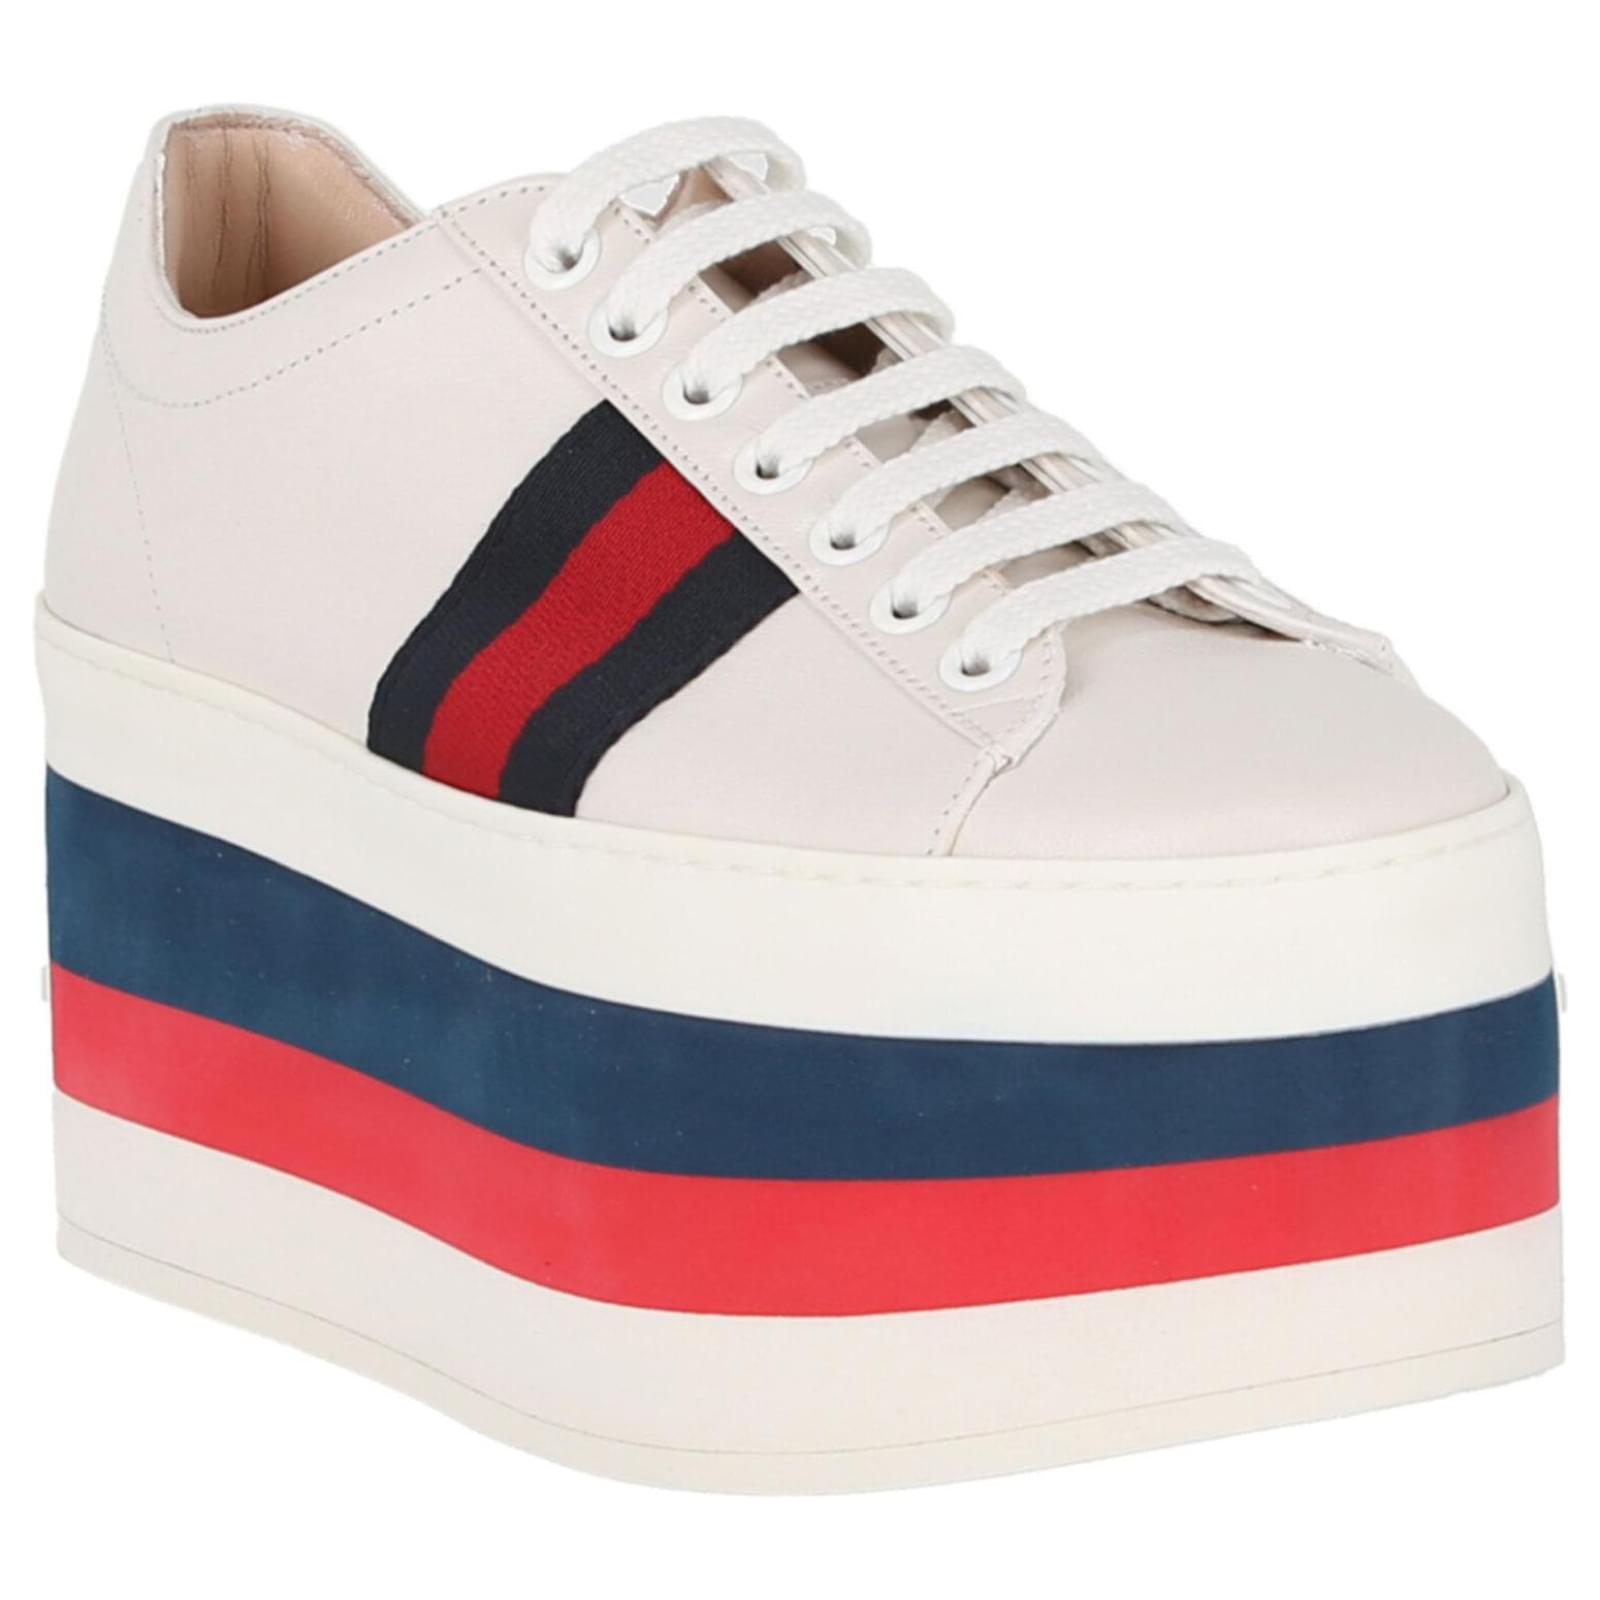 Gucci Sylvie Web Accent Leather Wedge Sneakers Multiple colors ref ...